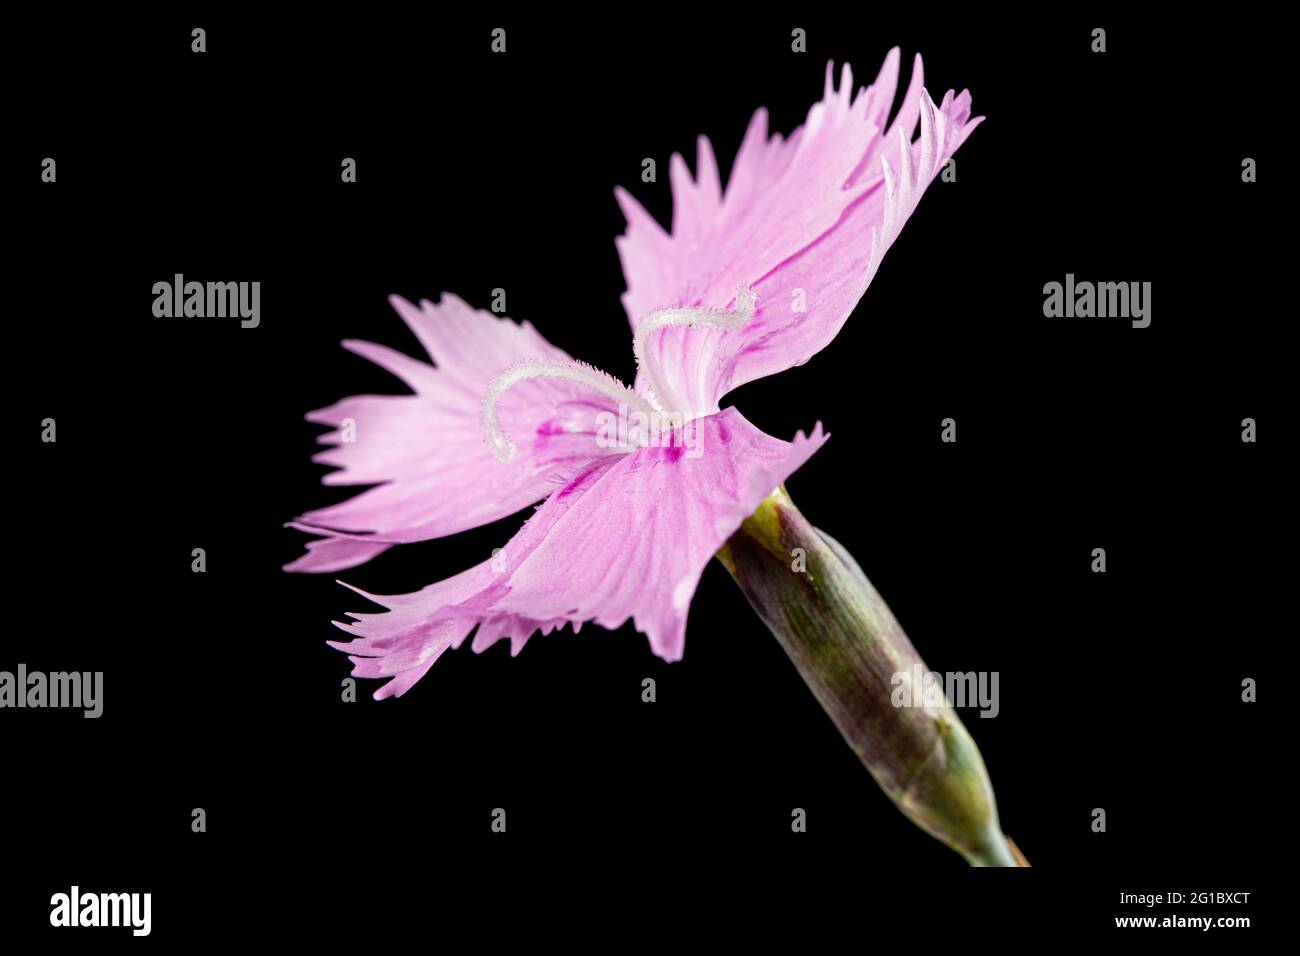 Pink flower of carnation, lat. Dianthus deltoides, isolated on black background Stock Photo